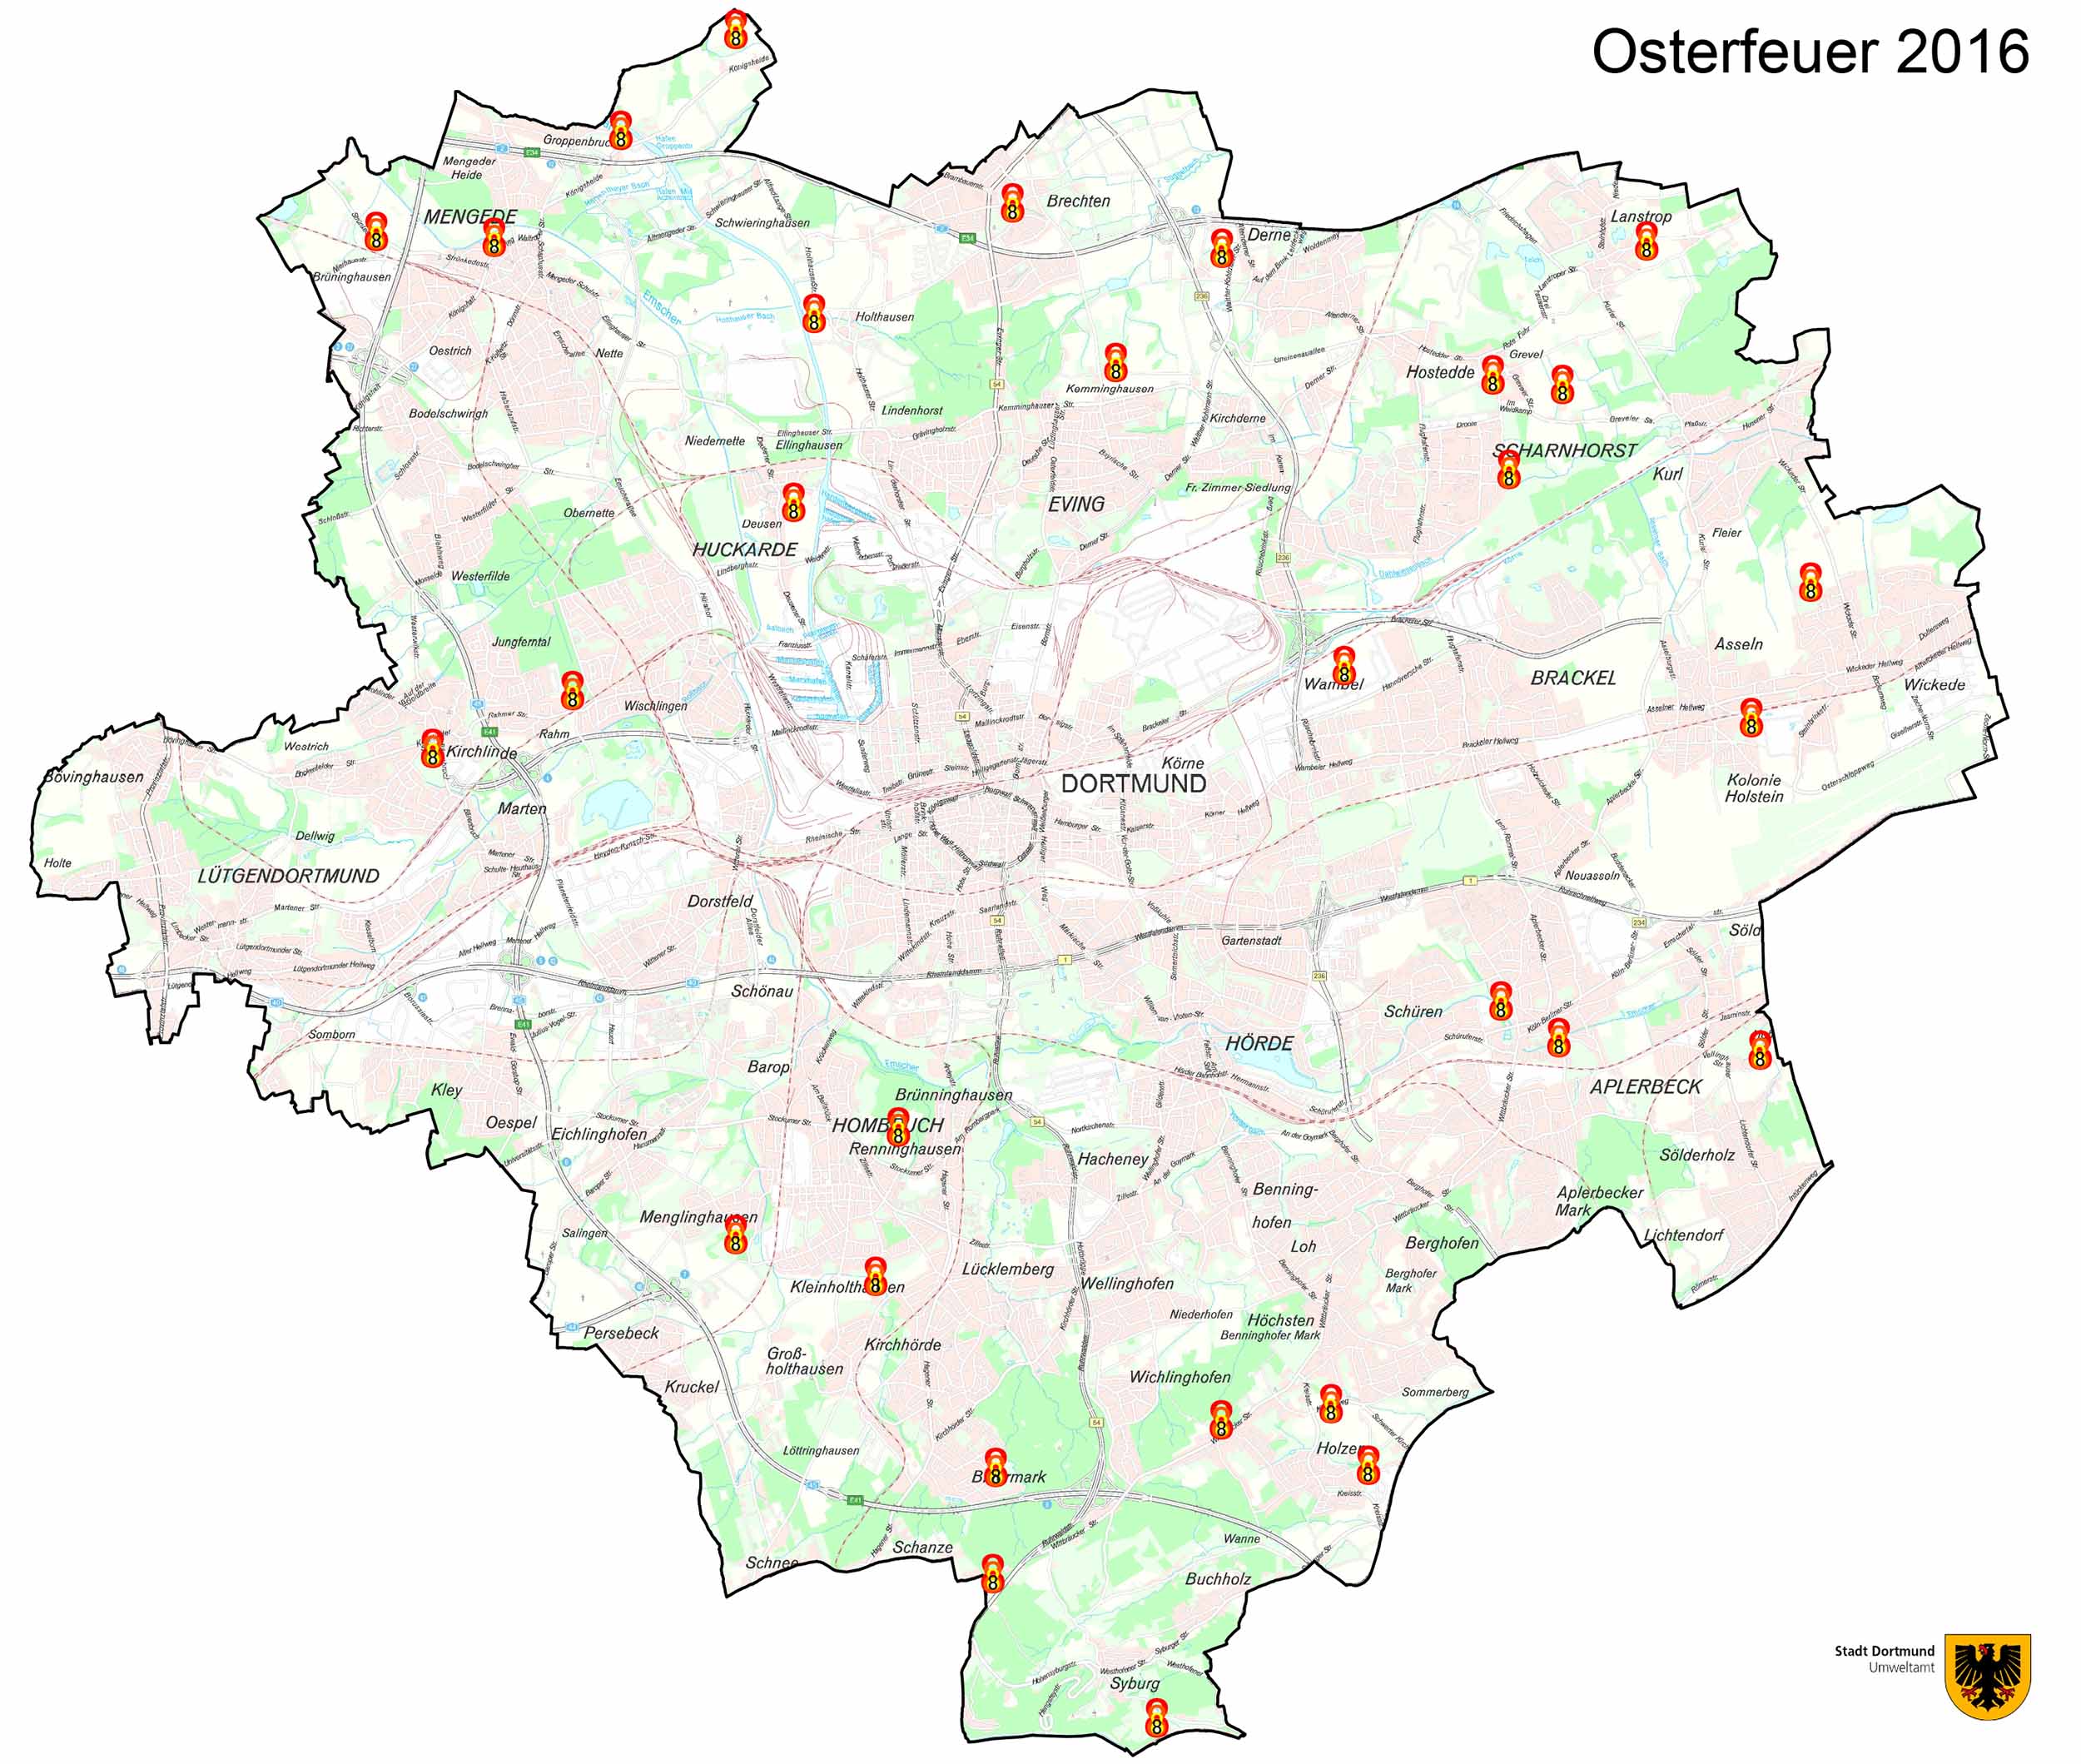 Osterfeuer2016